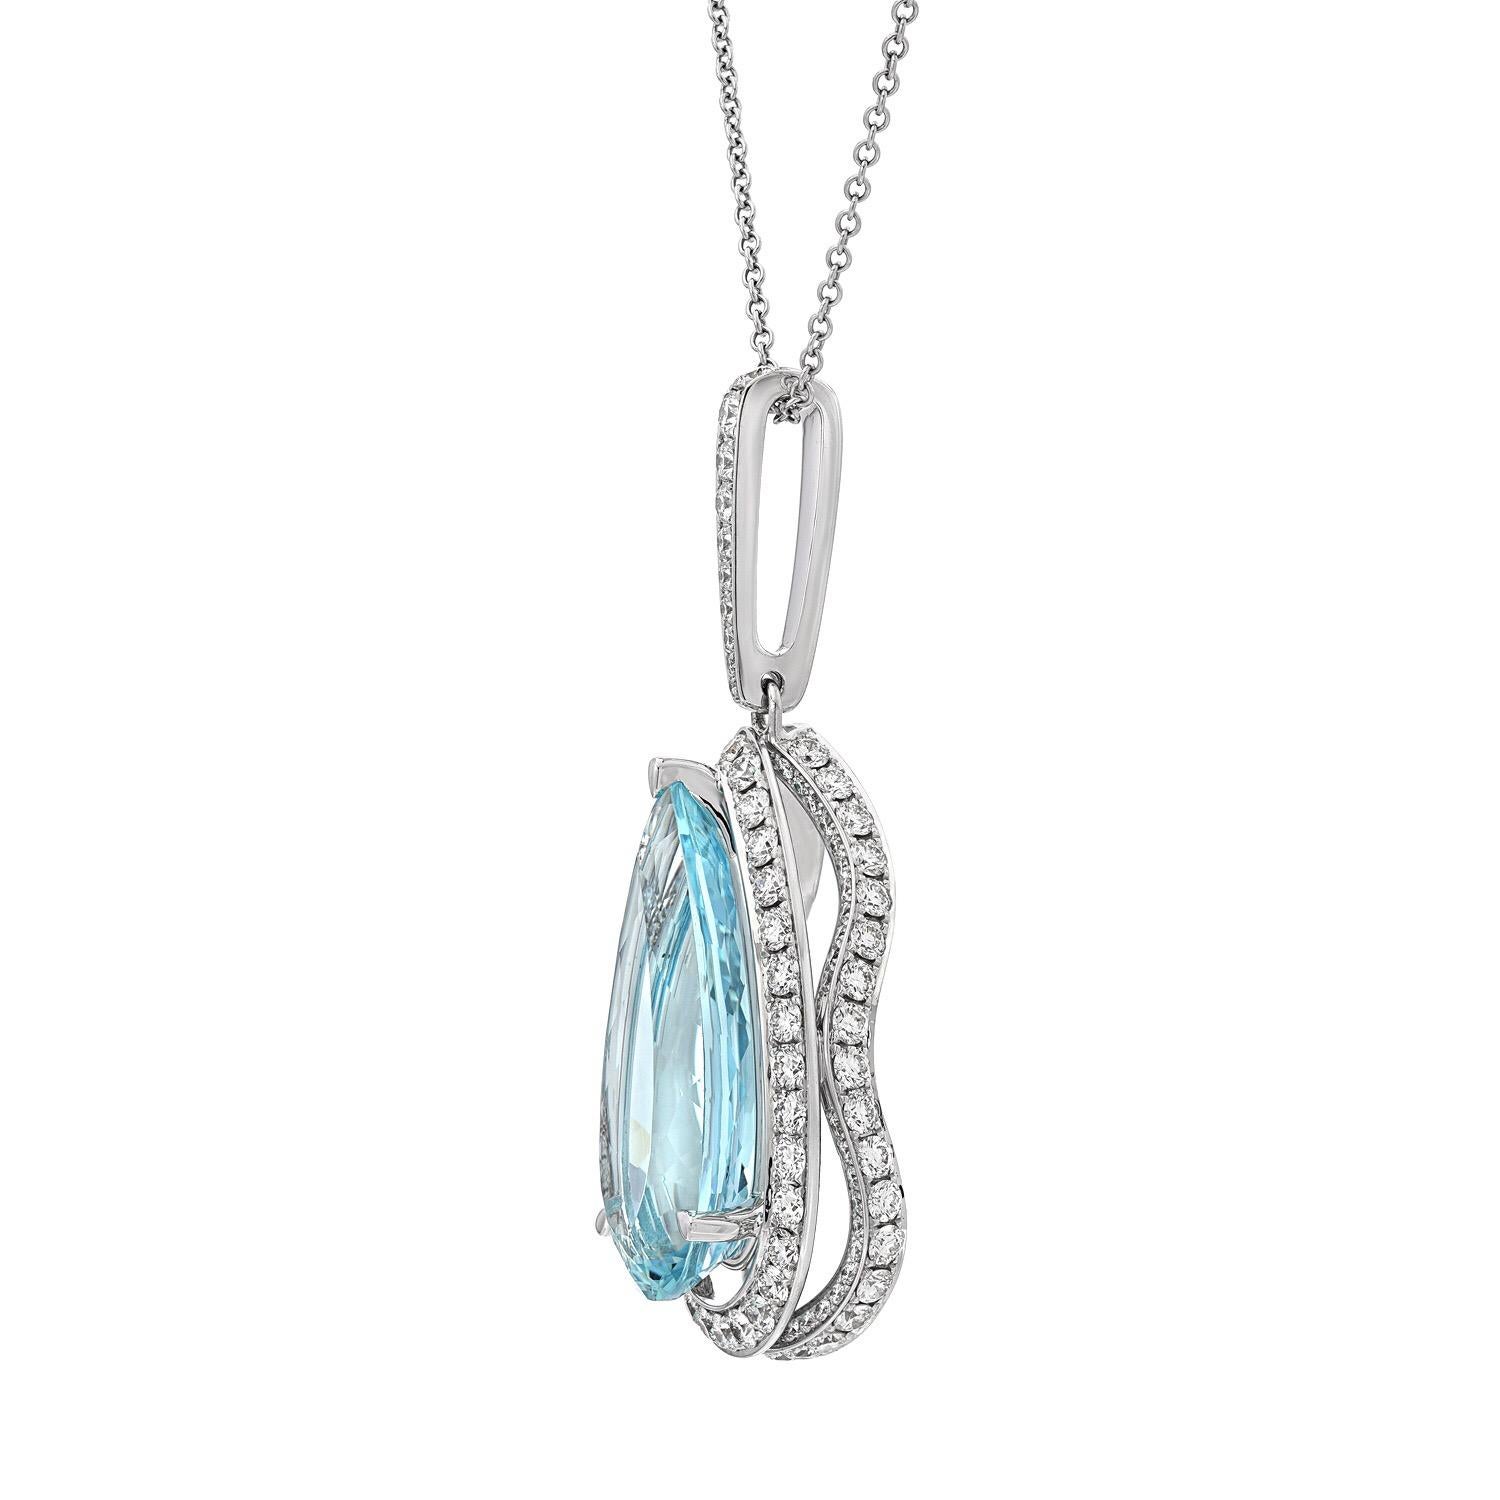 Remarkable 24.01 carat pear shaped Aquamarine set in a diamond necklace weighing a total of 4.62 carats and suspended from an 18K white gold chain. The chain length can be adjusted upon request.

Returns are accepted and paid by us within 7 days of